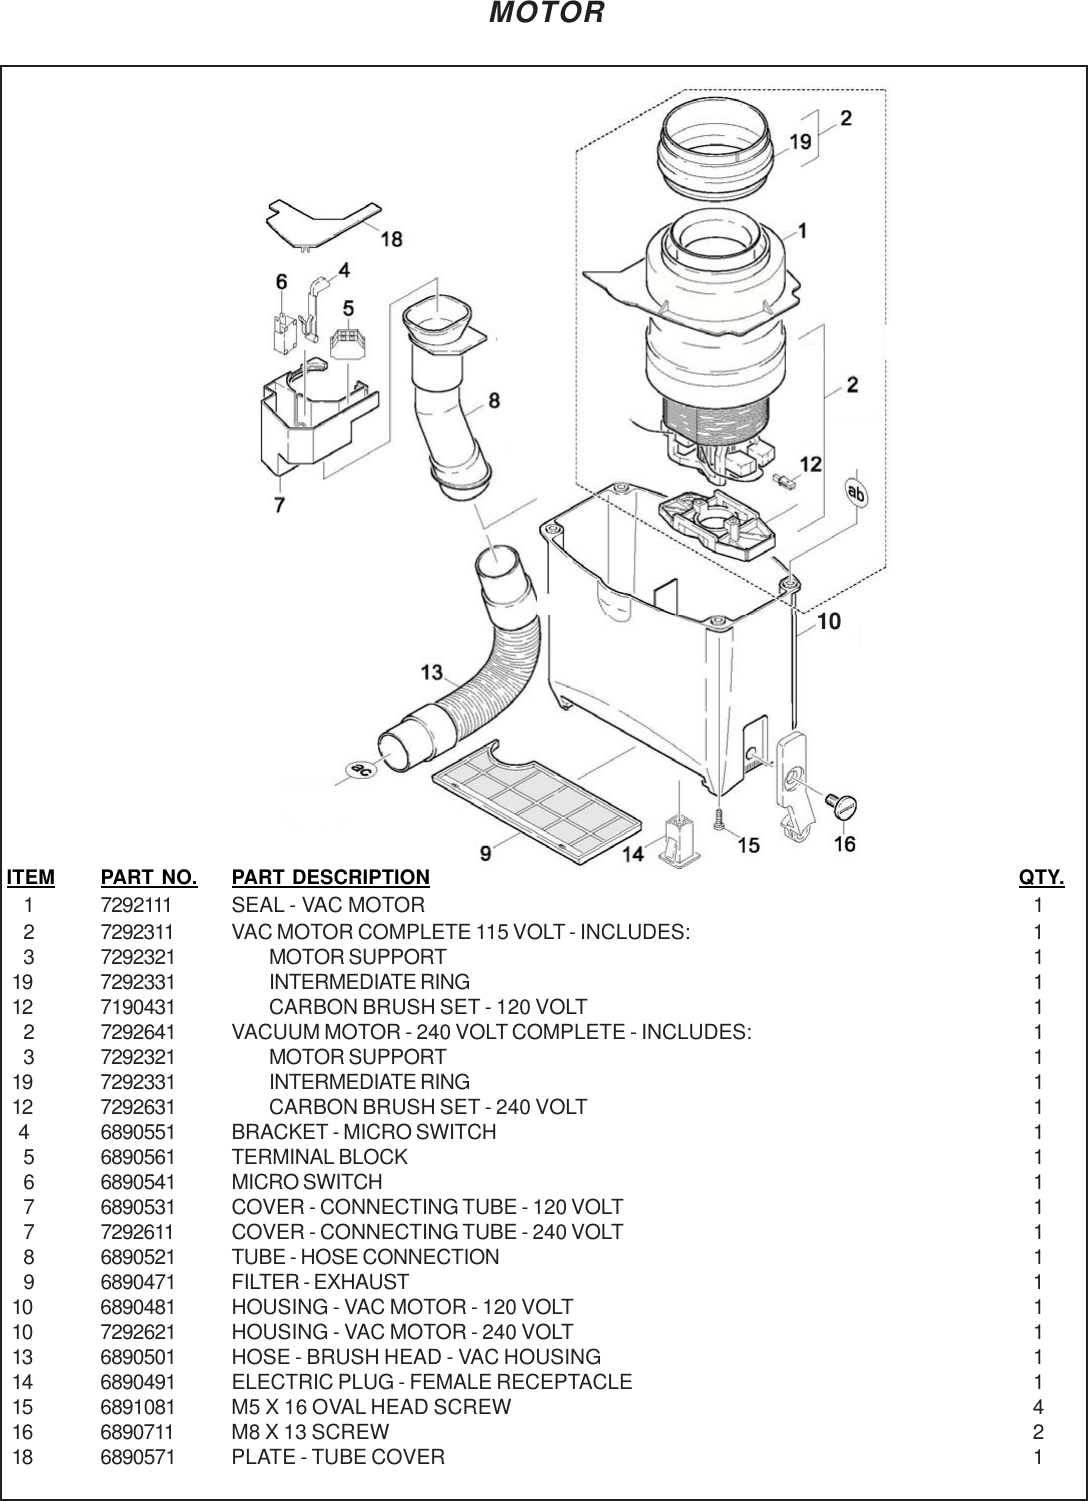 Page 5 of 12 - 9097272 Pacer Dual Motor Illustrated Parts Book.pmd  Nss-pacer-214-ue-218-ue-upright-vacuum-parts-manual